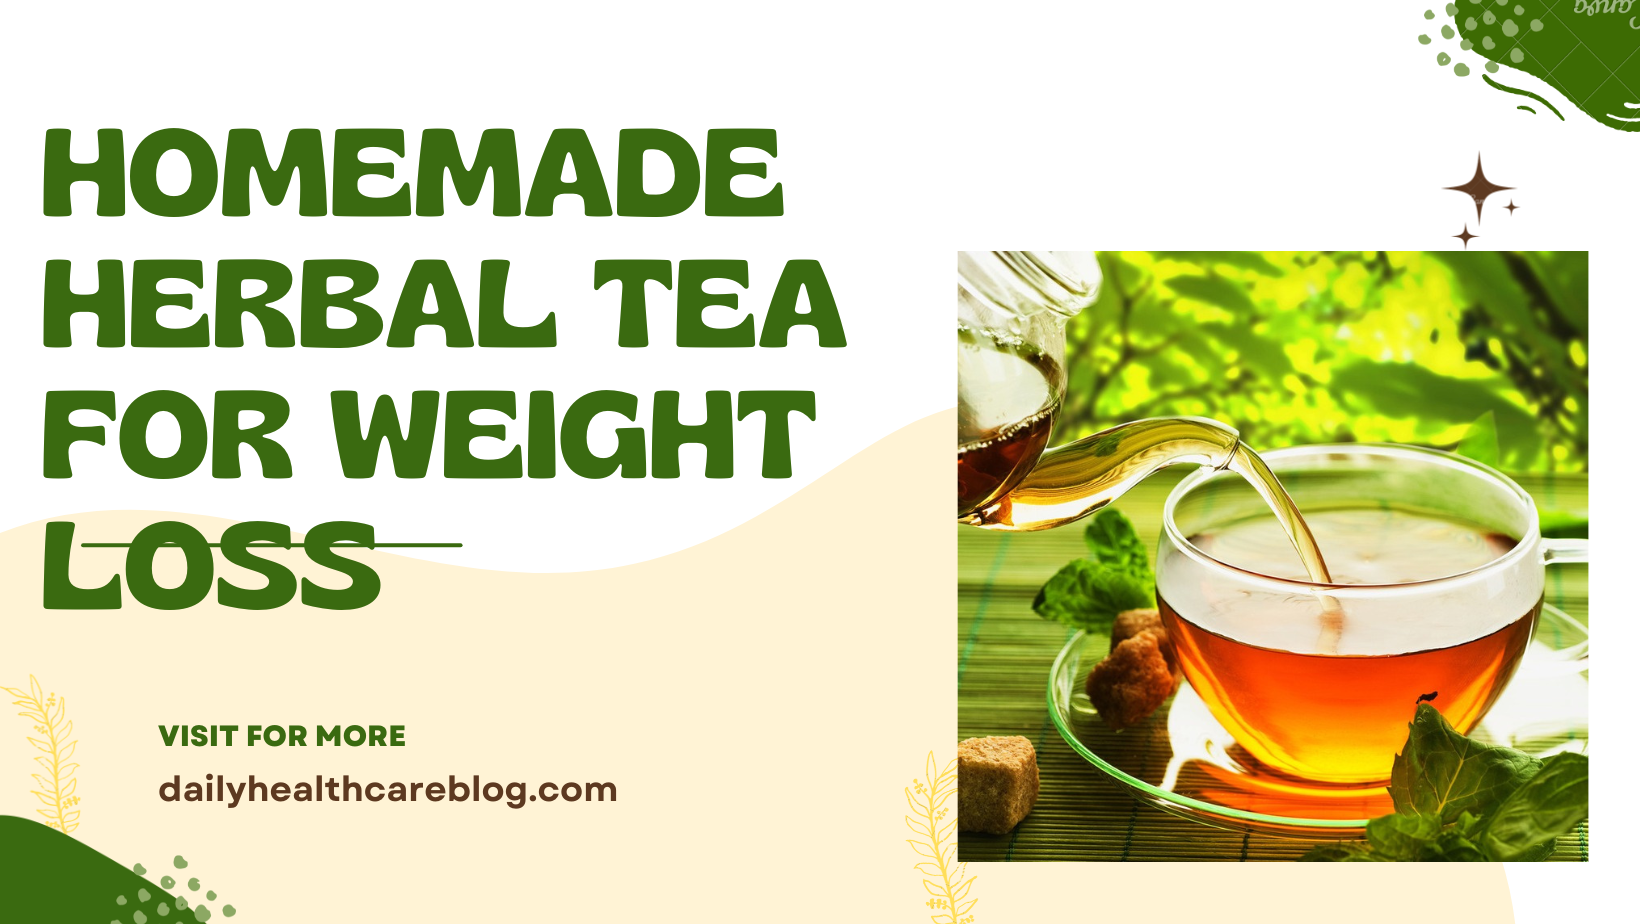 Homemade Herbal Tea For Weight Loss